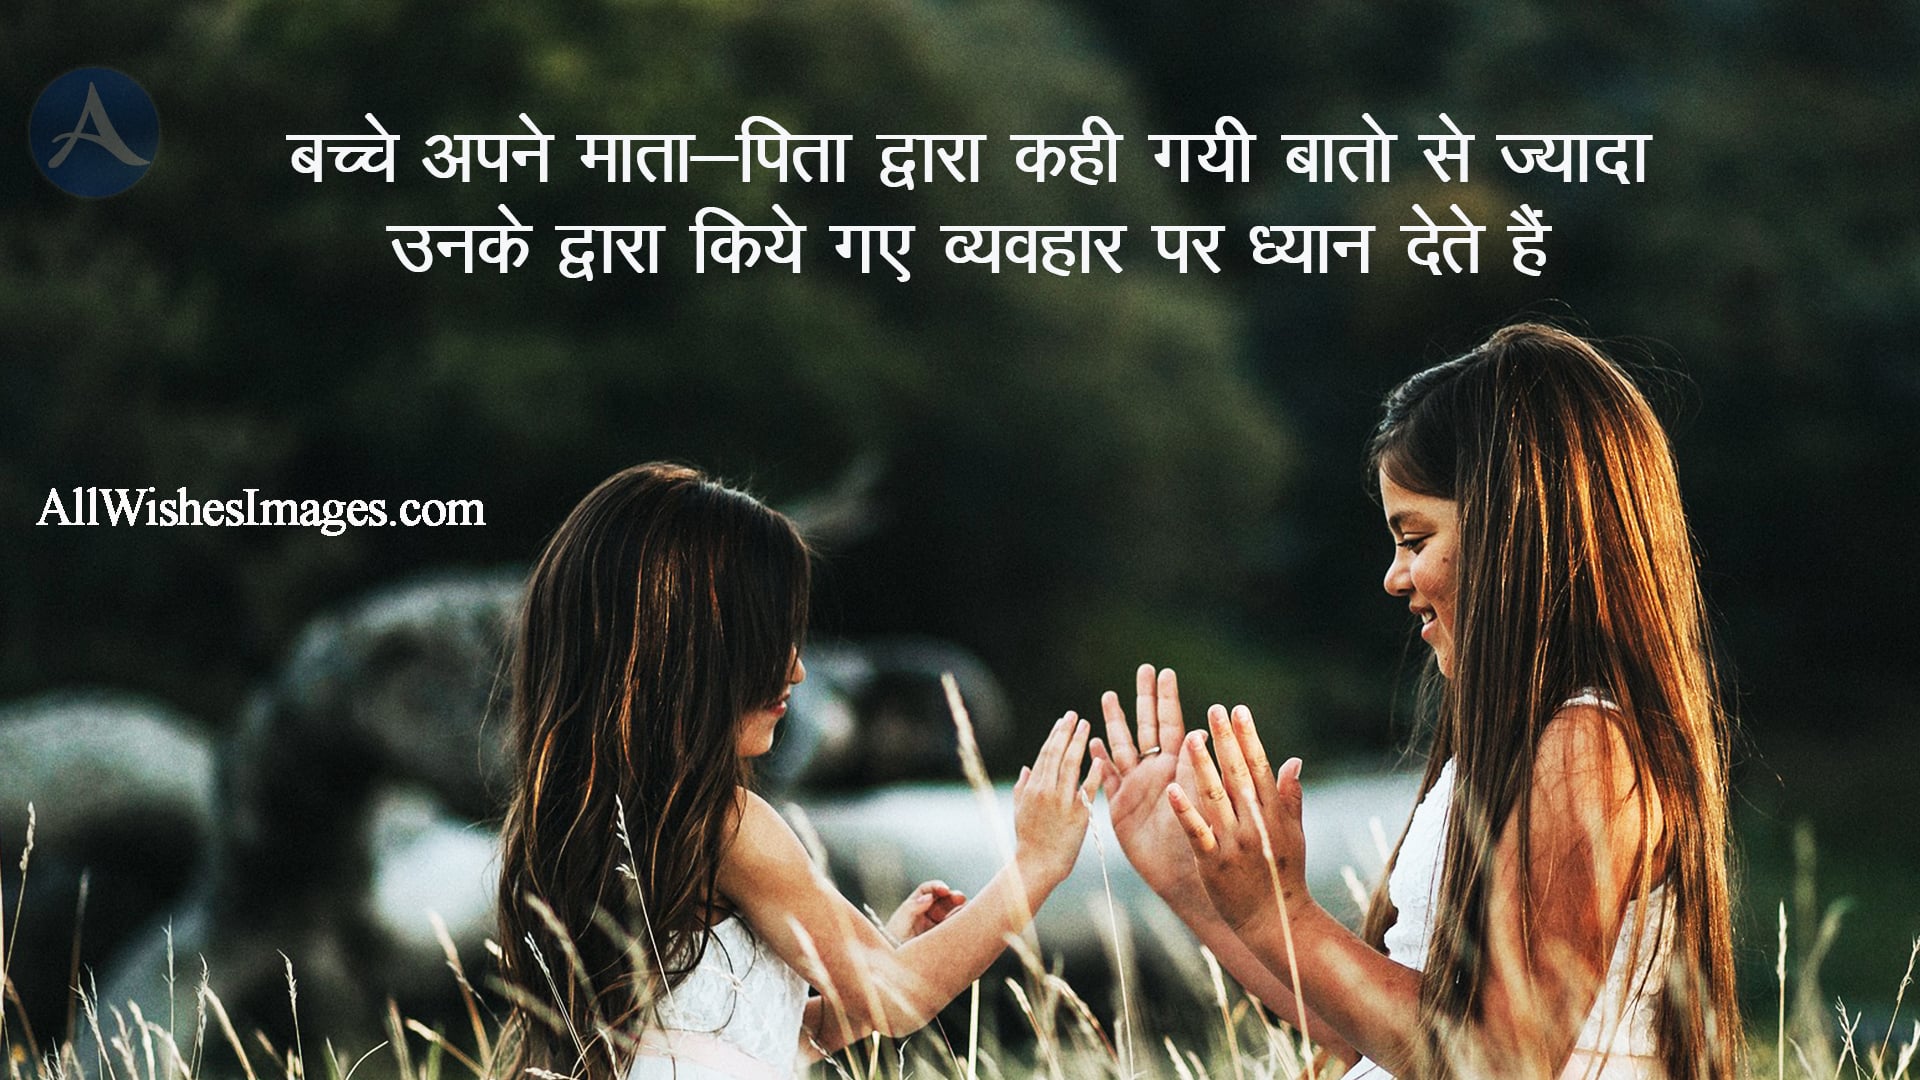 Children's Day Shayari Images - All Wishes Images - Images for WhatsApp